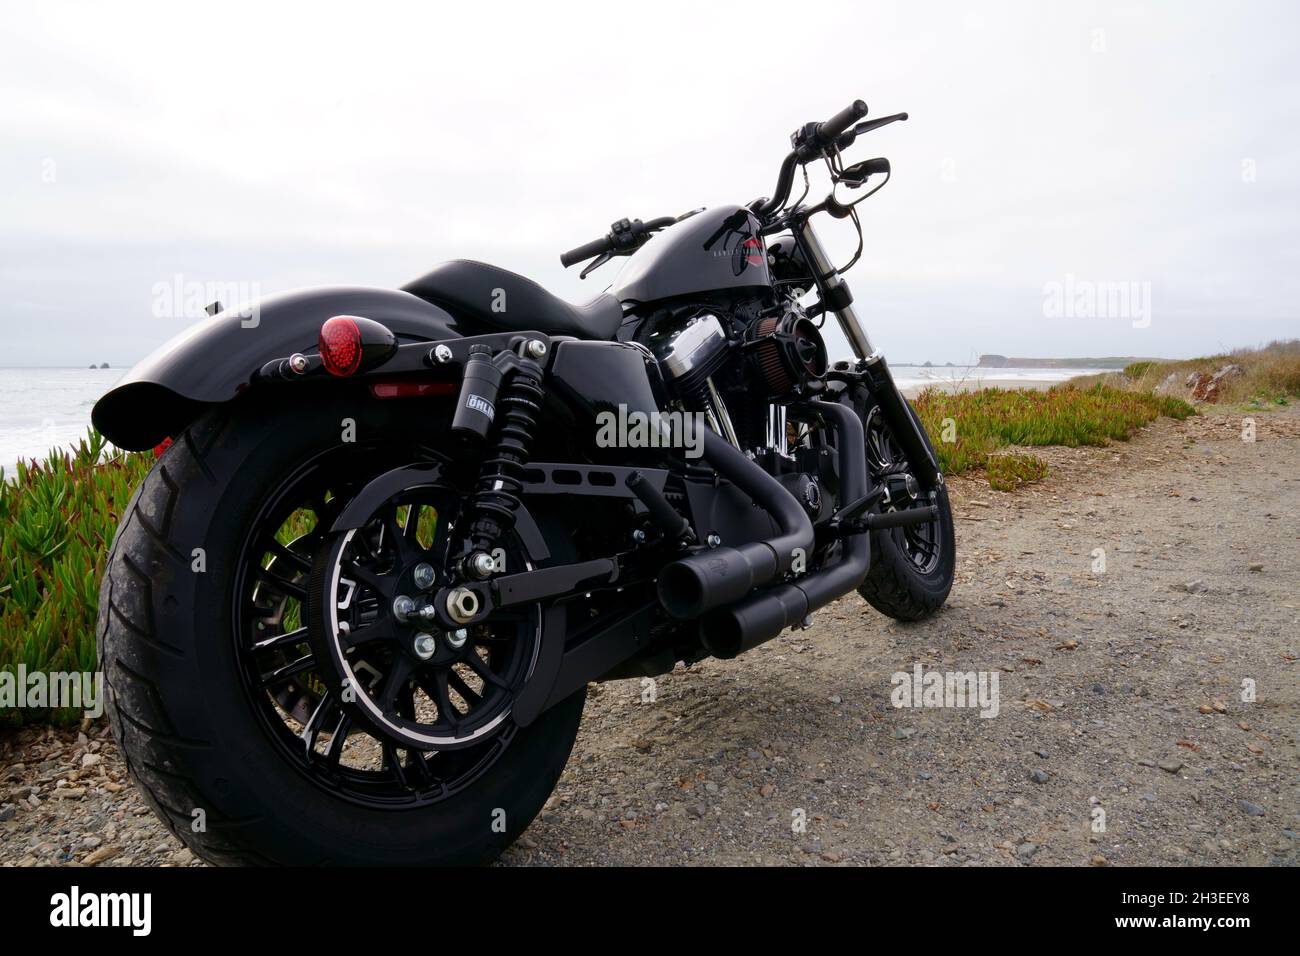 CRESCENT CITY, UNITED STATES - Sep 26, 2021: Harley Davidson Sportster Forty-Eight at the Pacific Ocean Stock Photo